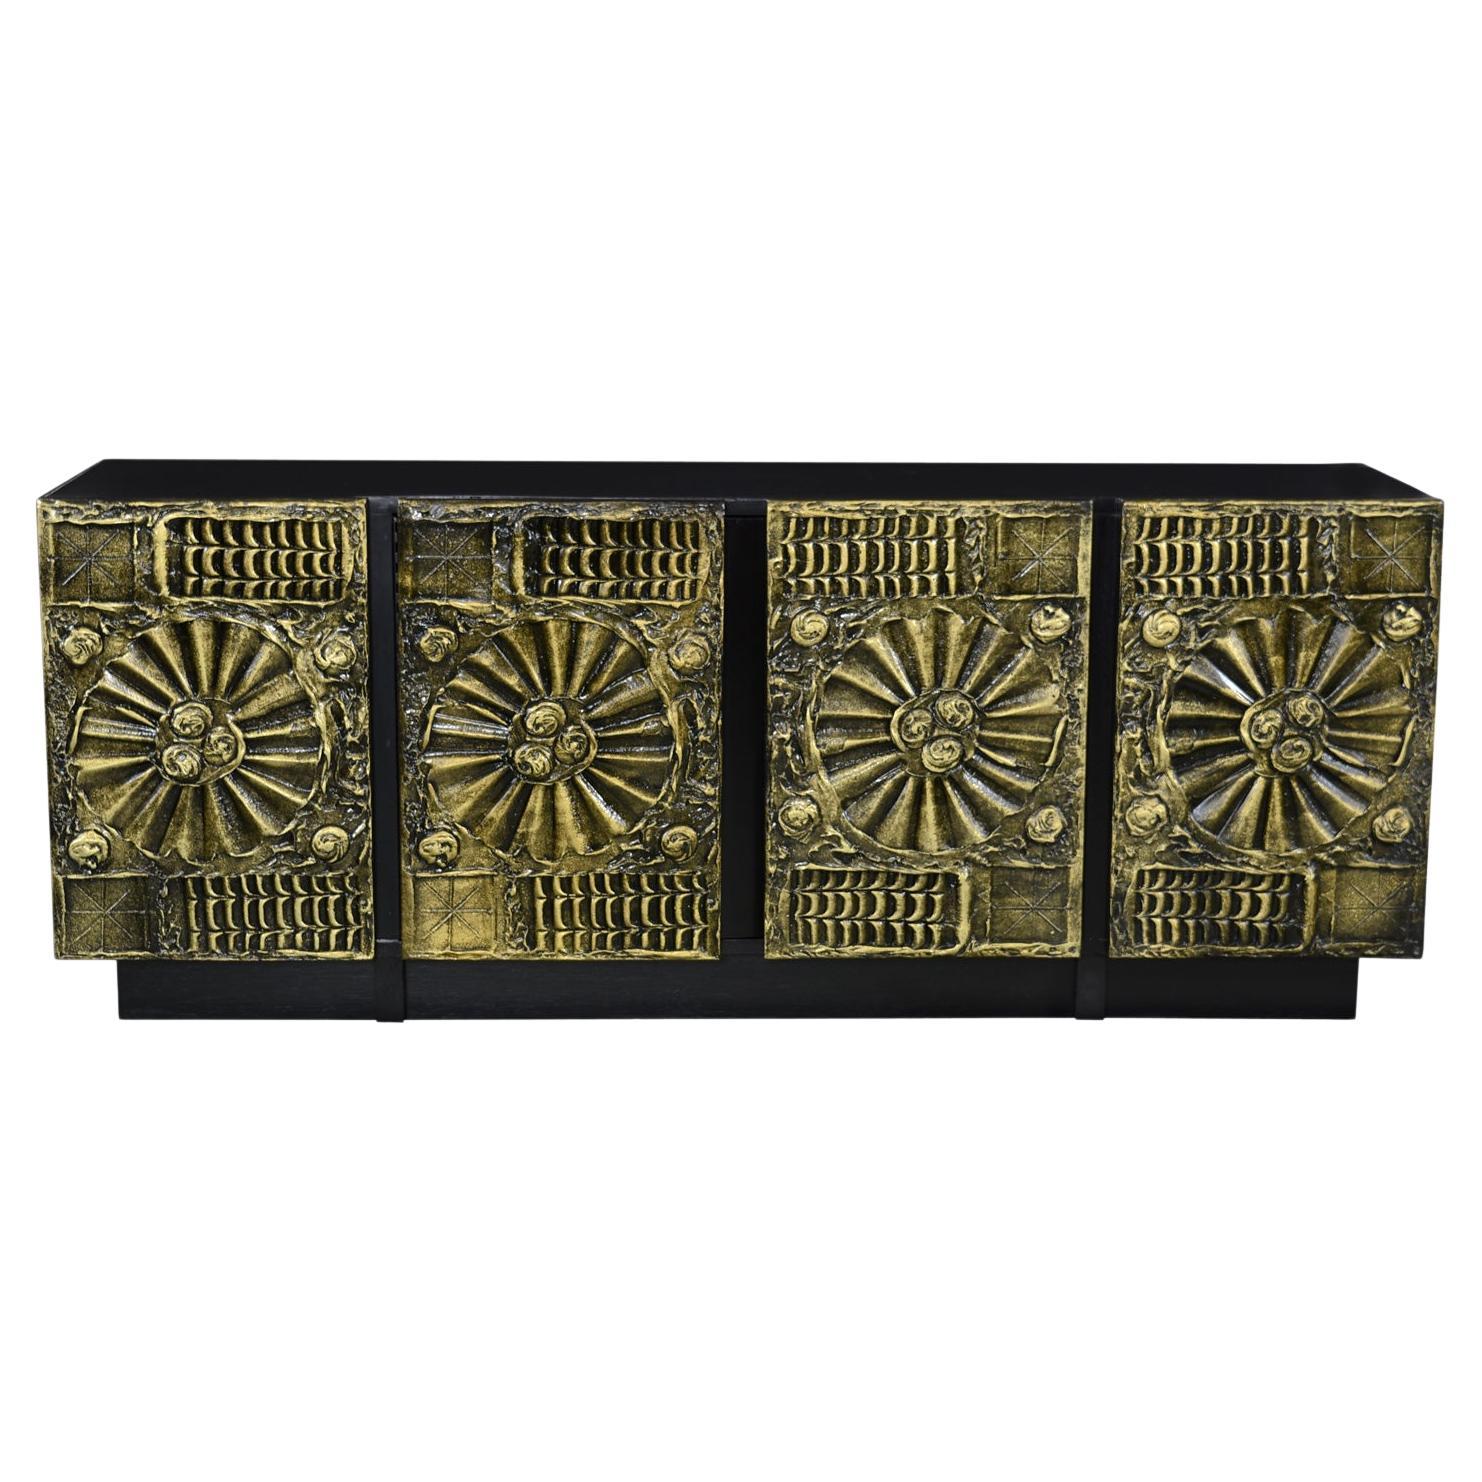 Restored Gold Brutalist Credenza by Adrian Pearsall for Craft Associates